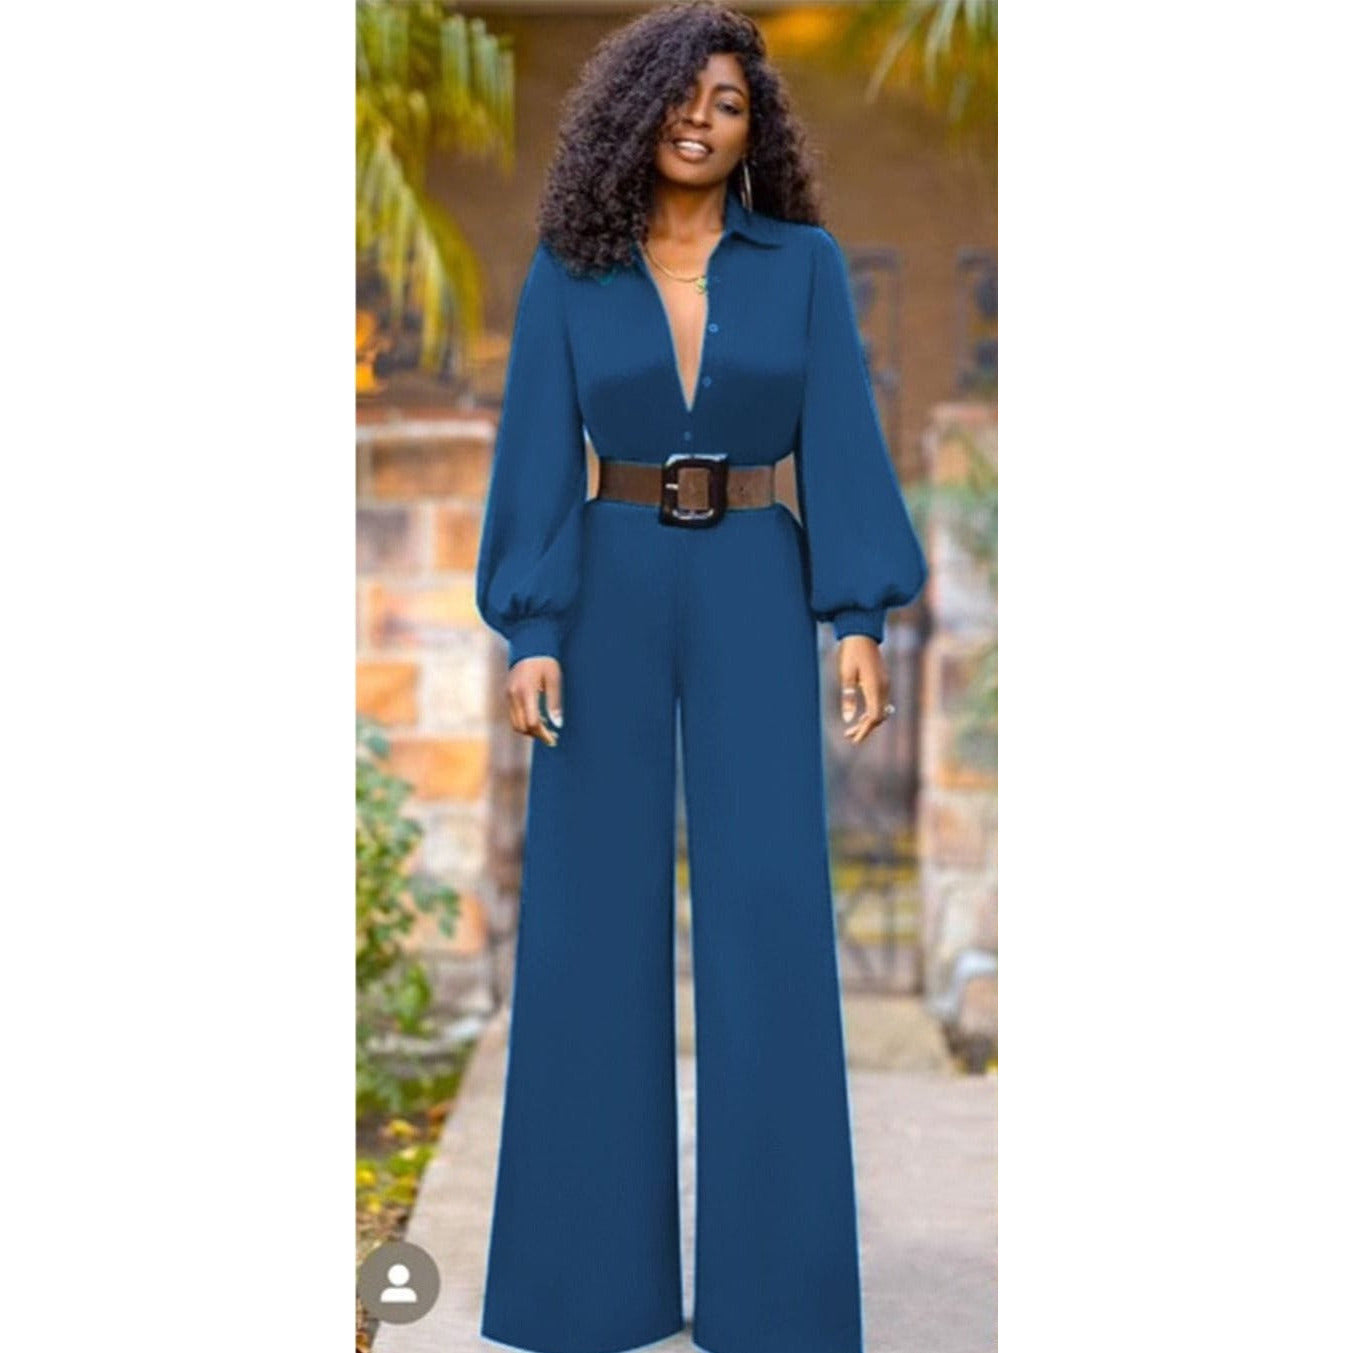 Playsuits & Jumpsuits - Button Detailed Overall Jumpsuit for sale in ...